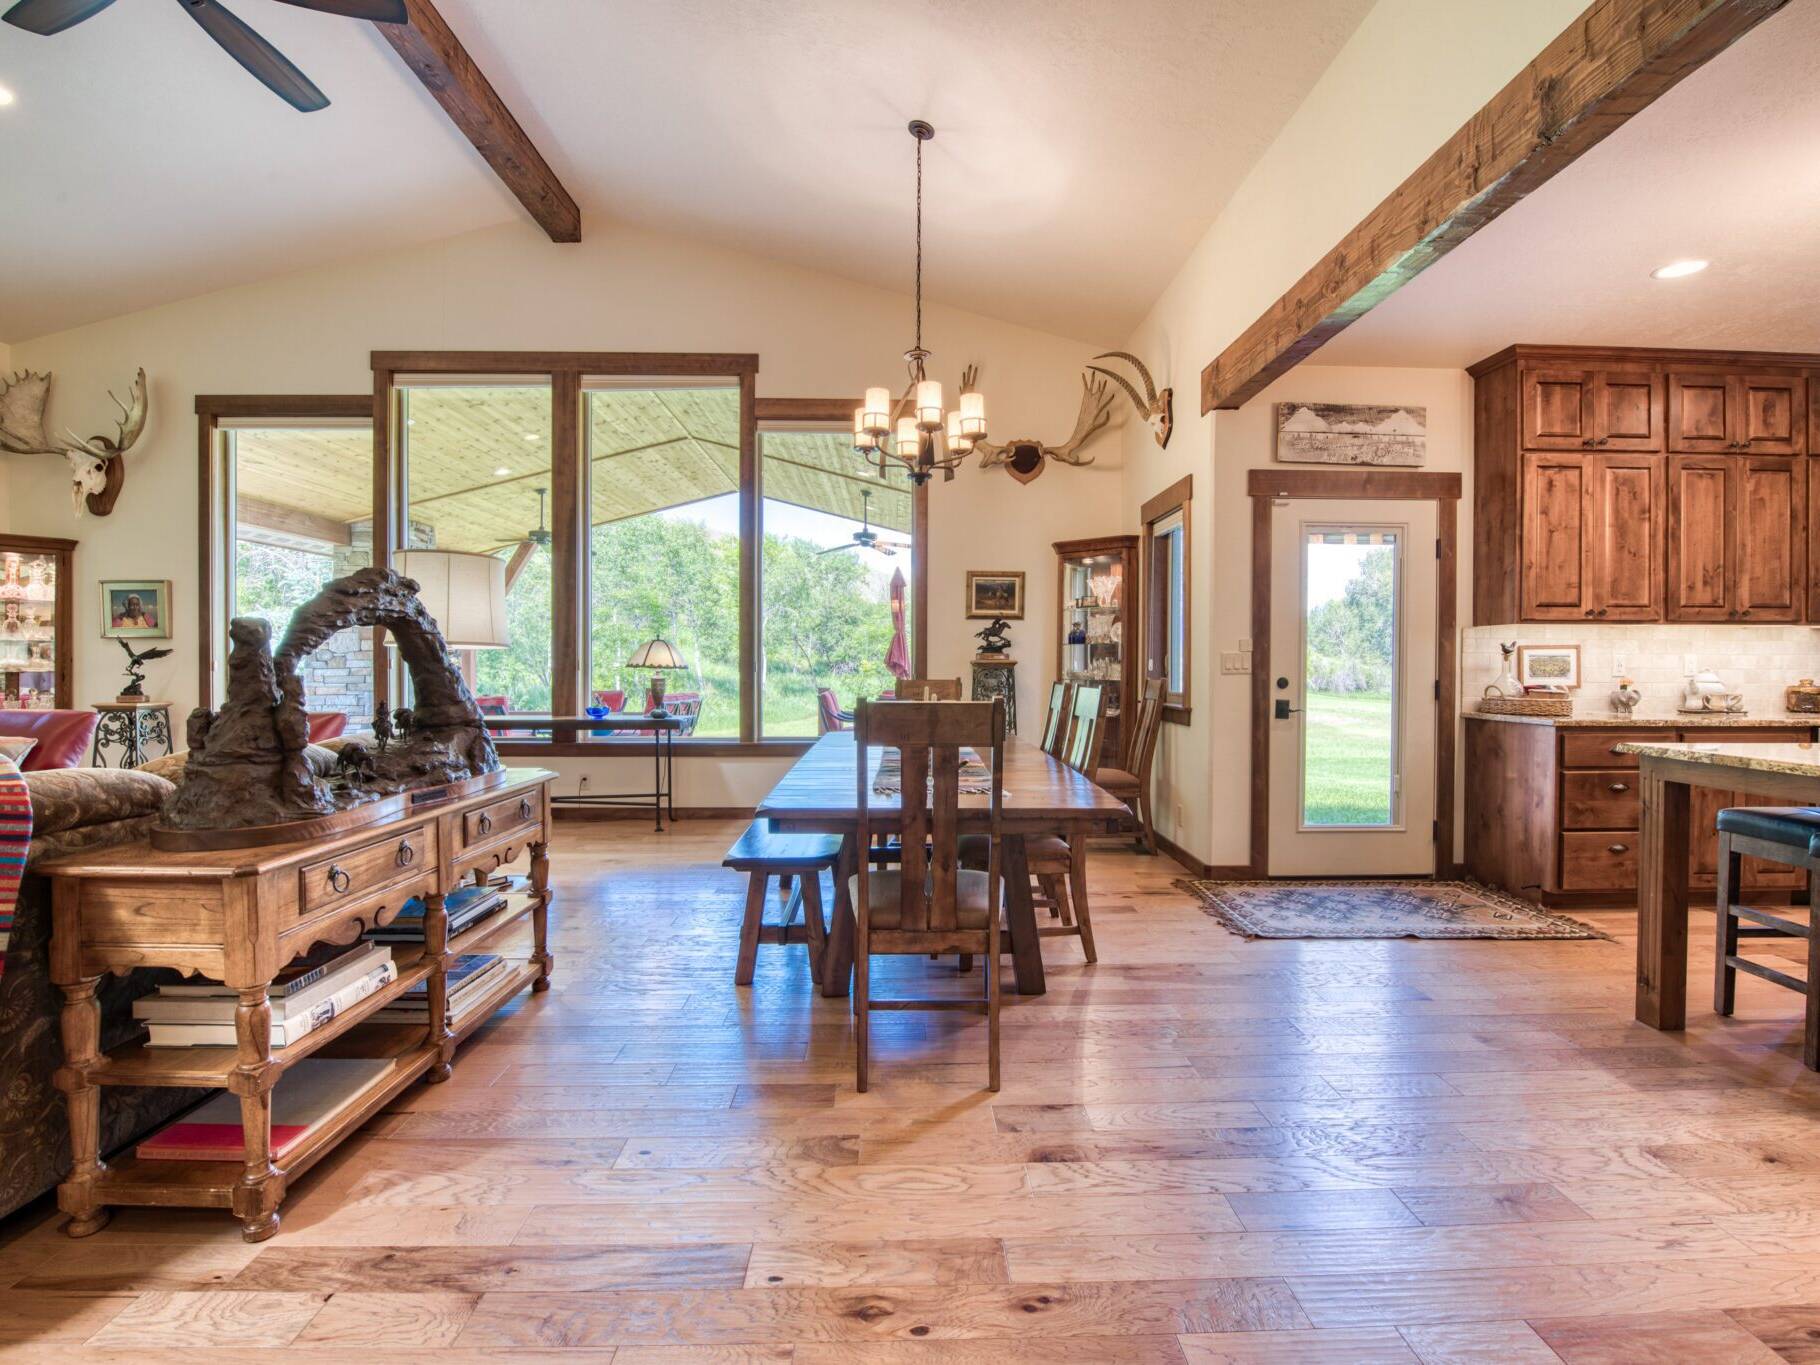 Dining room with hardwood floors, large windows, vaulted ceiling with accent beam in a custom home near Hamilton, MT